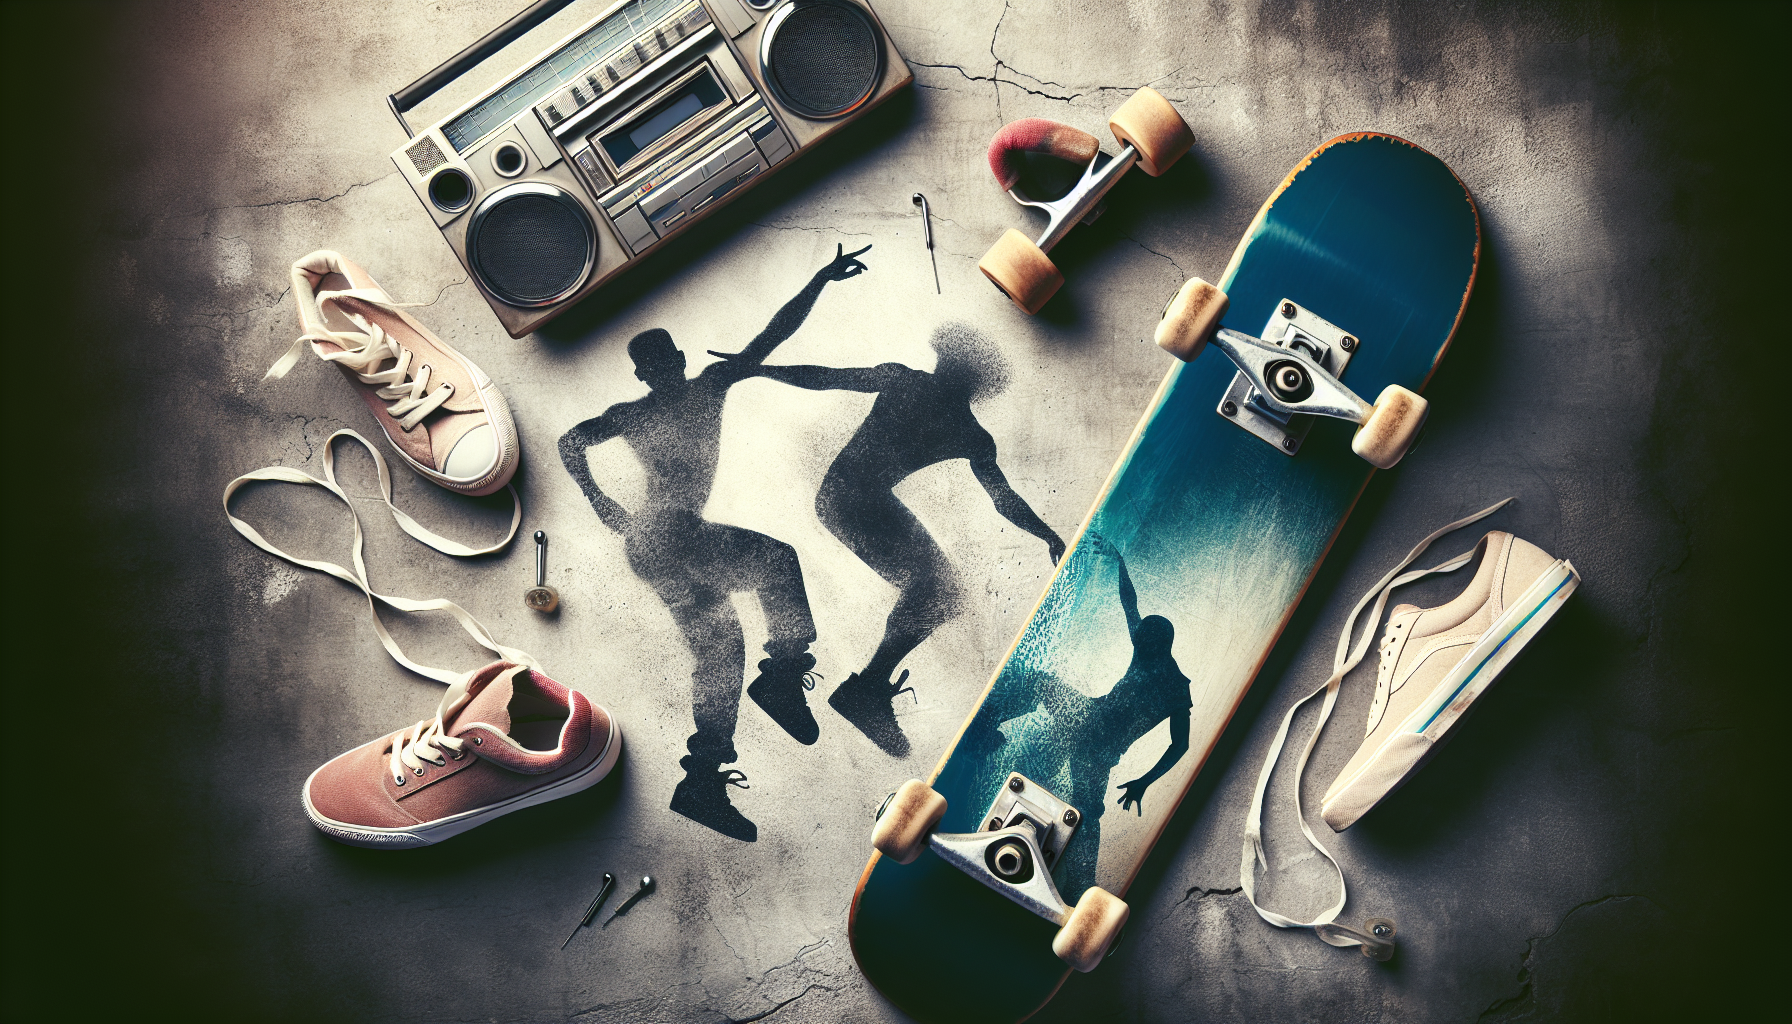 What Are The Best Approaches To Learning Skateboard Freestyle And Dancing Moves?